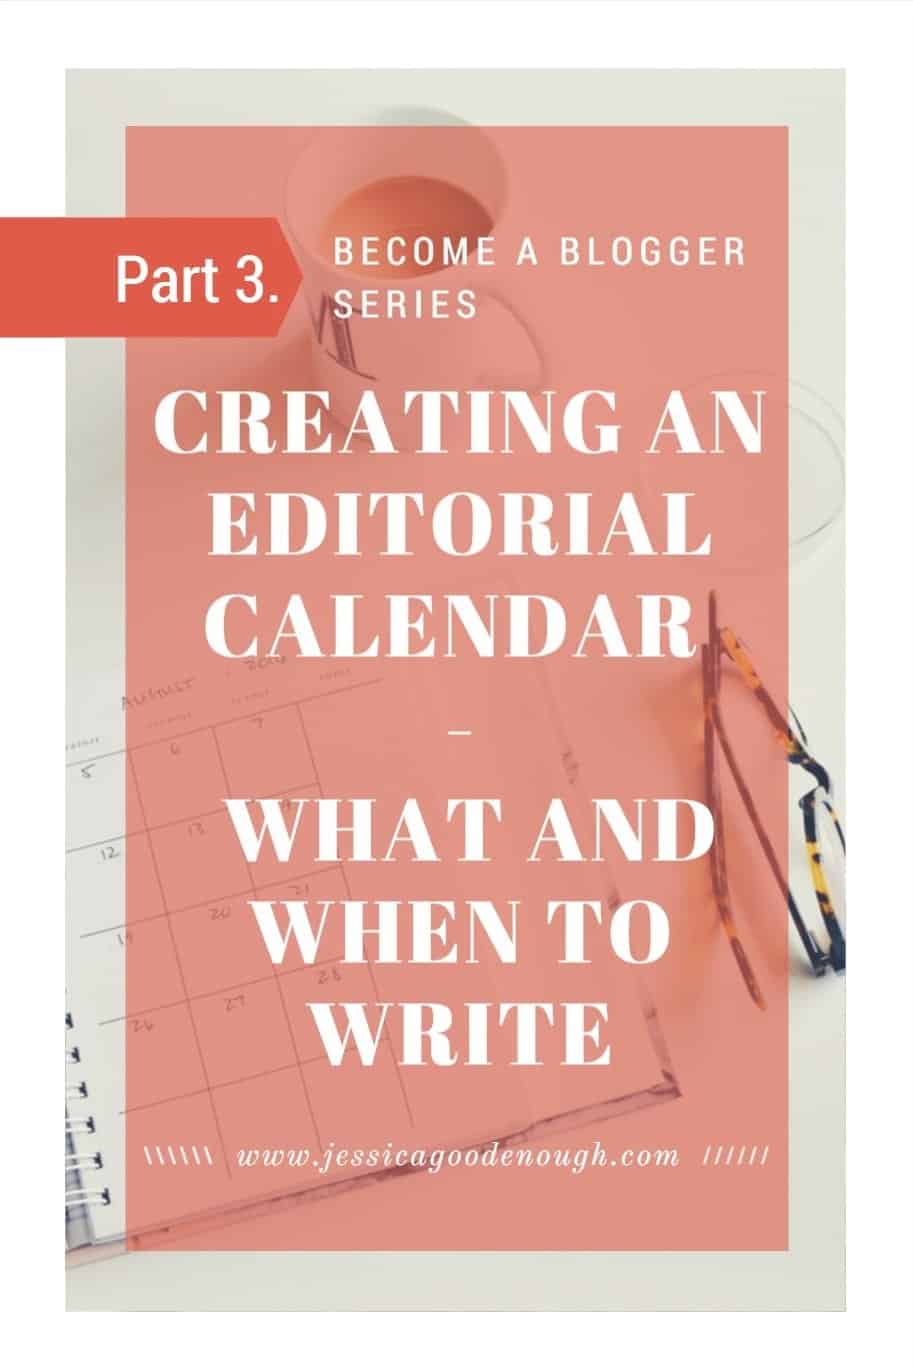 Creating and editorial calendar - what and when to write